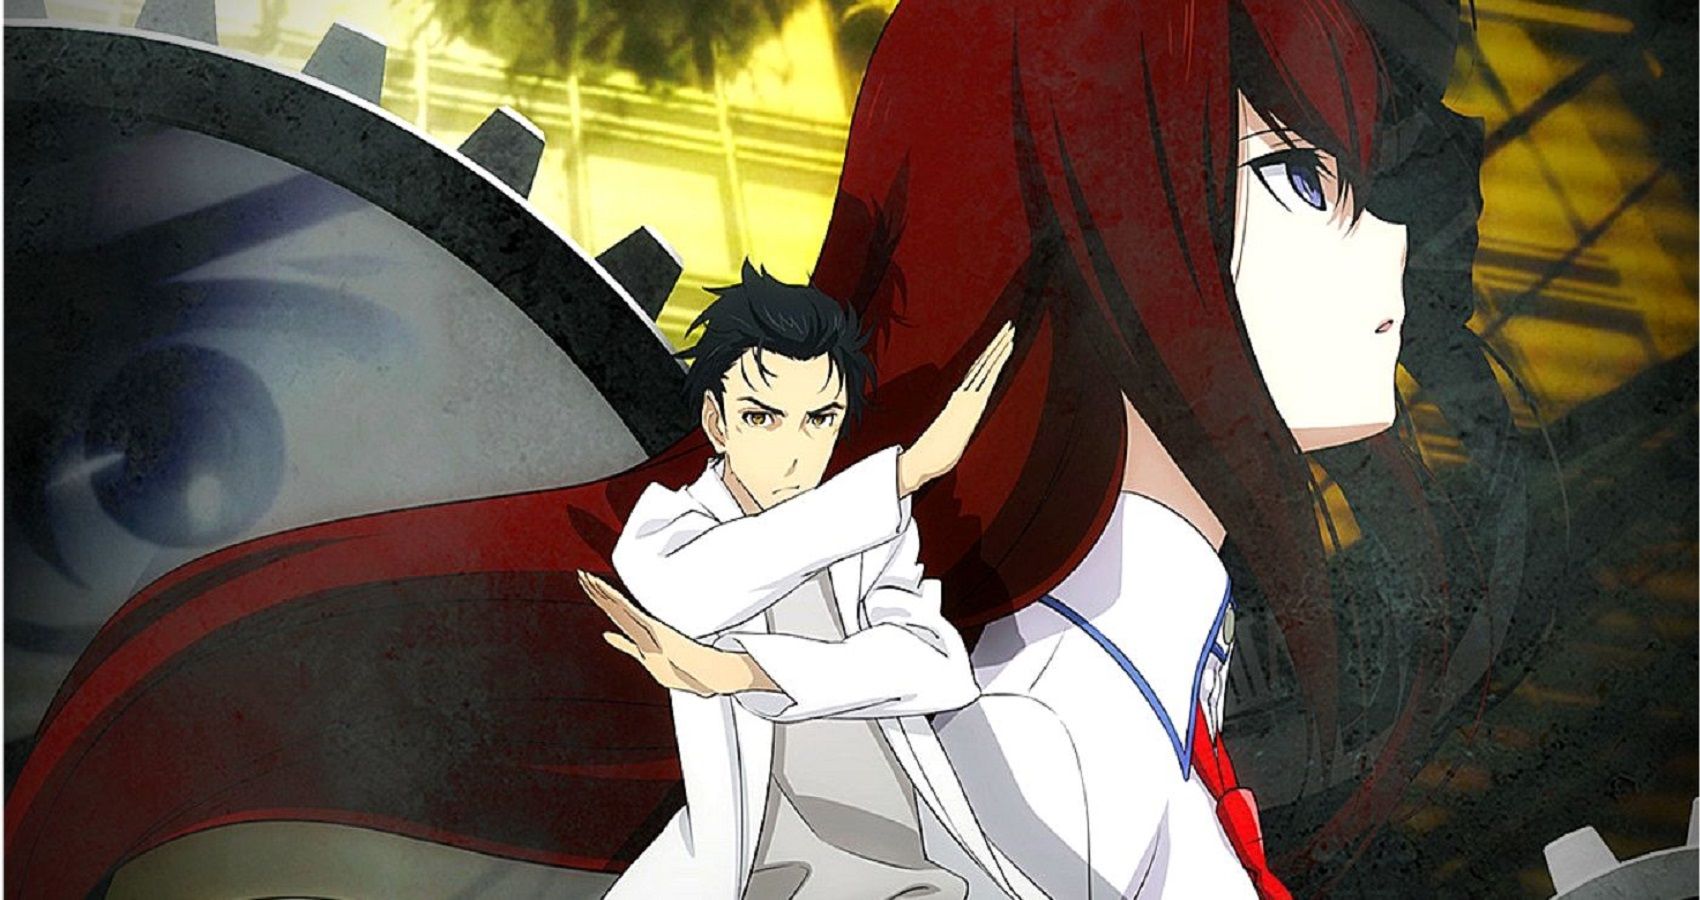 Steins Gate Vs Steins Gate 0: Unraveling the Time-Traveling Adventure